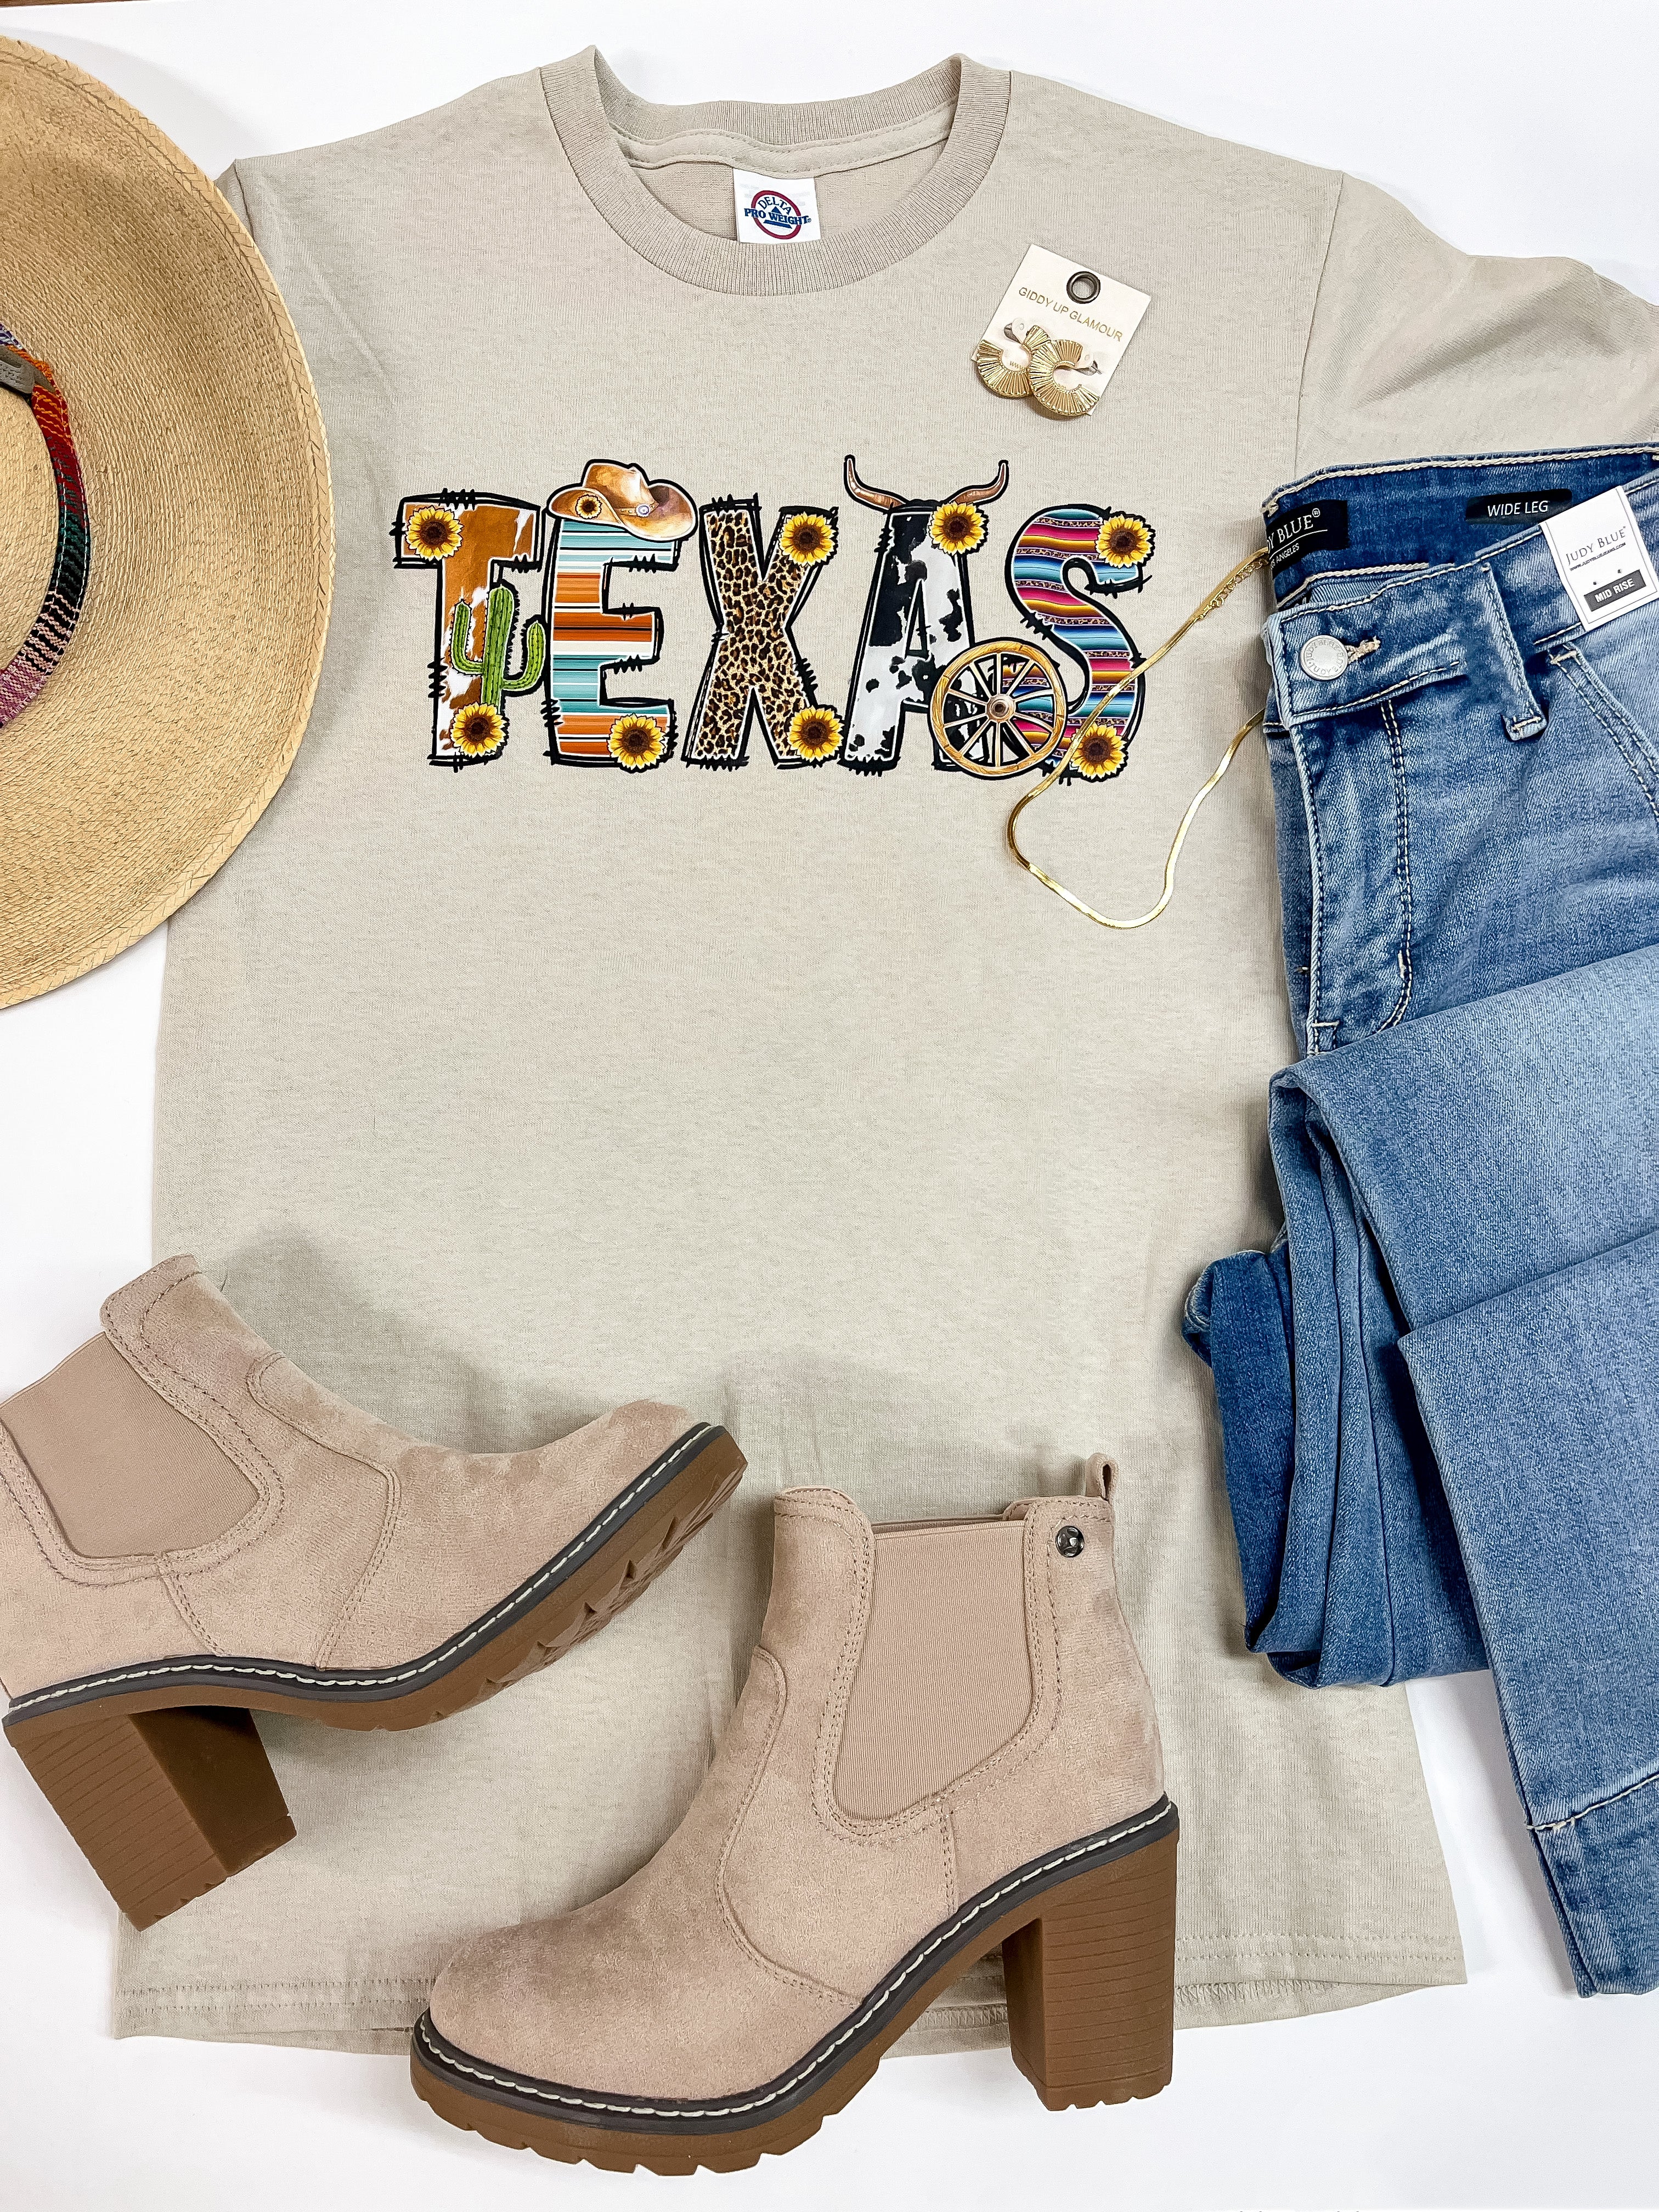 Texas Mix Print Short Sleeve Graphic Tee in Beige - Giddy Up Glamour Boutique